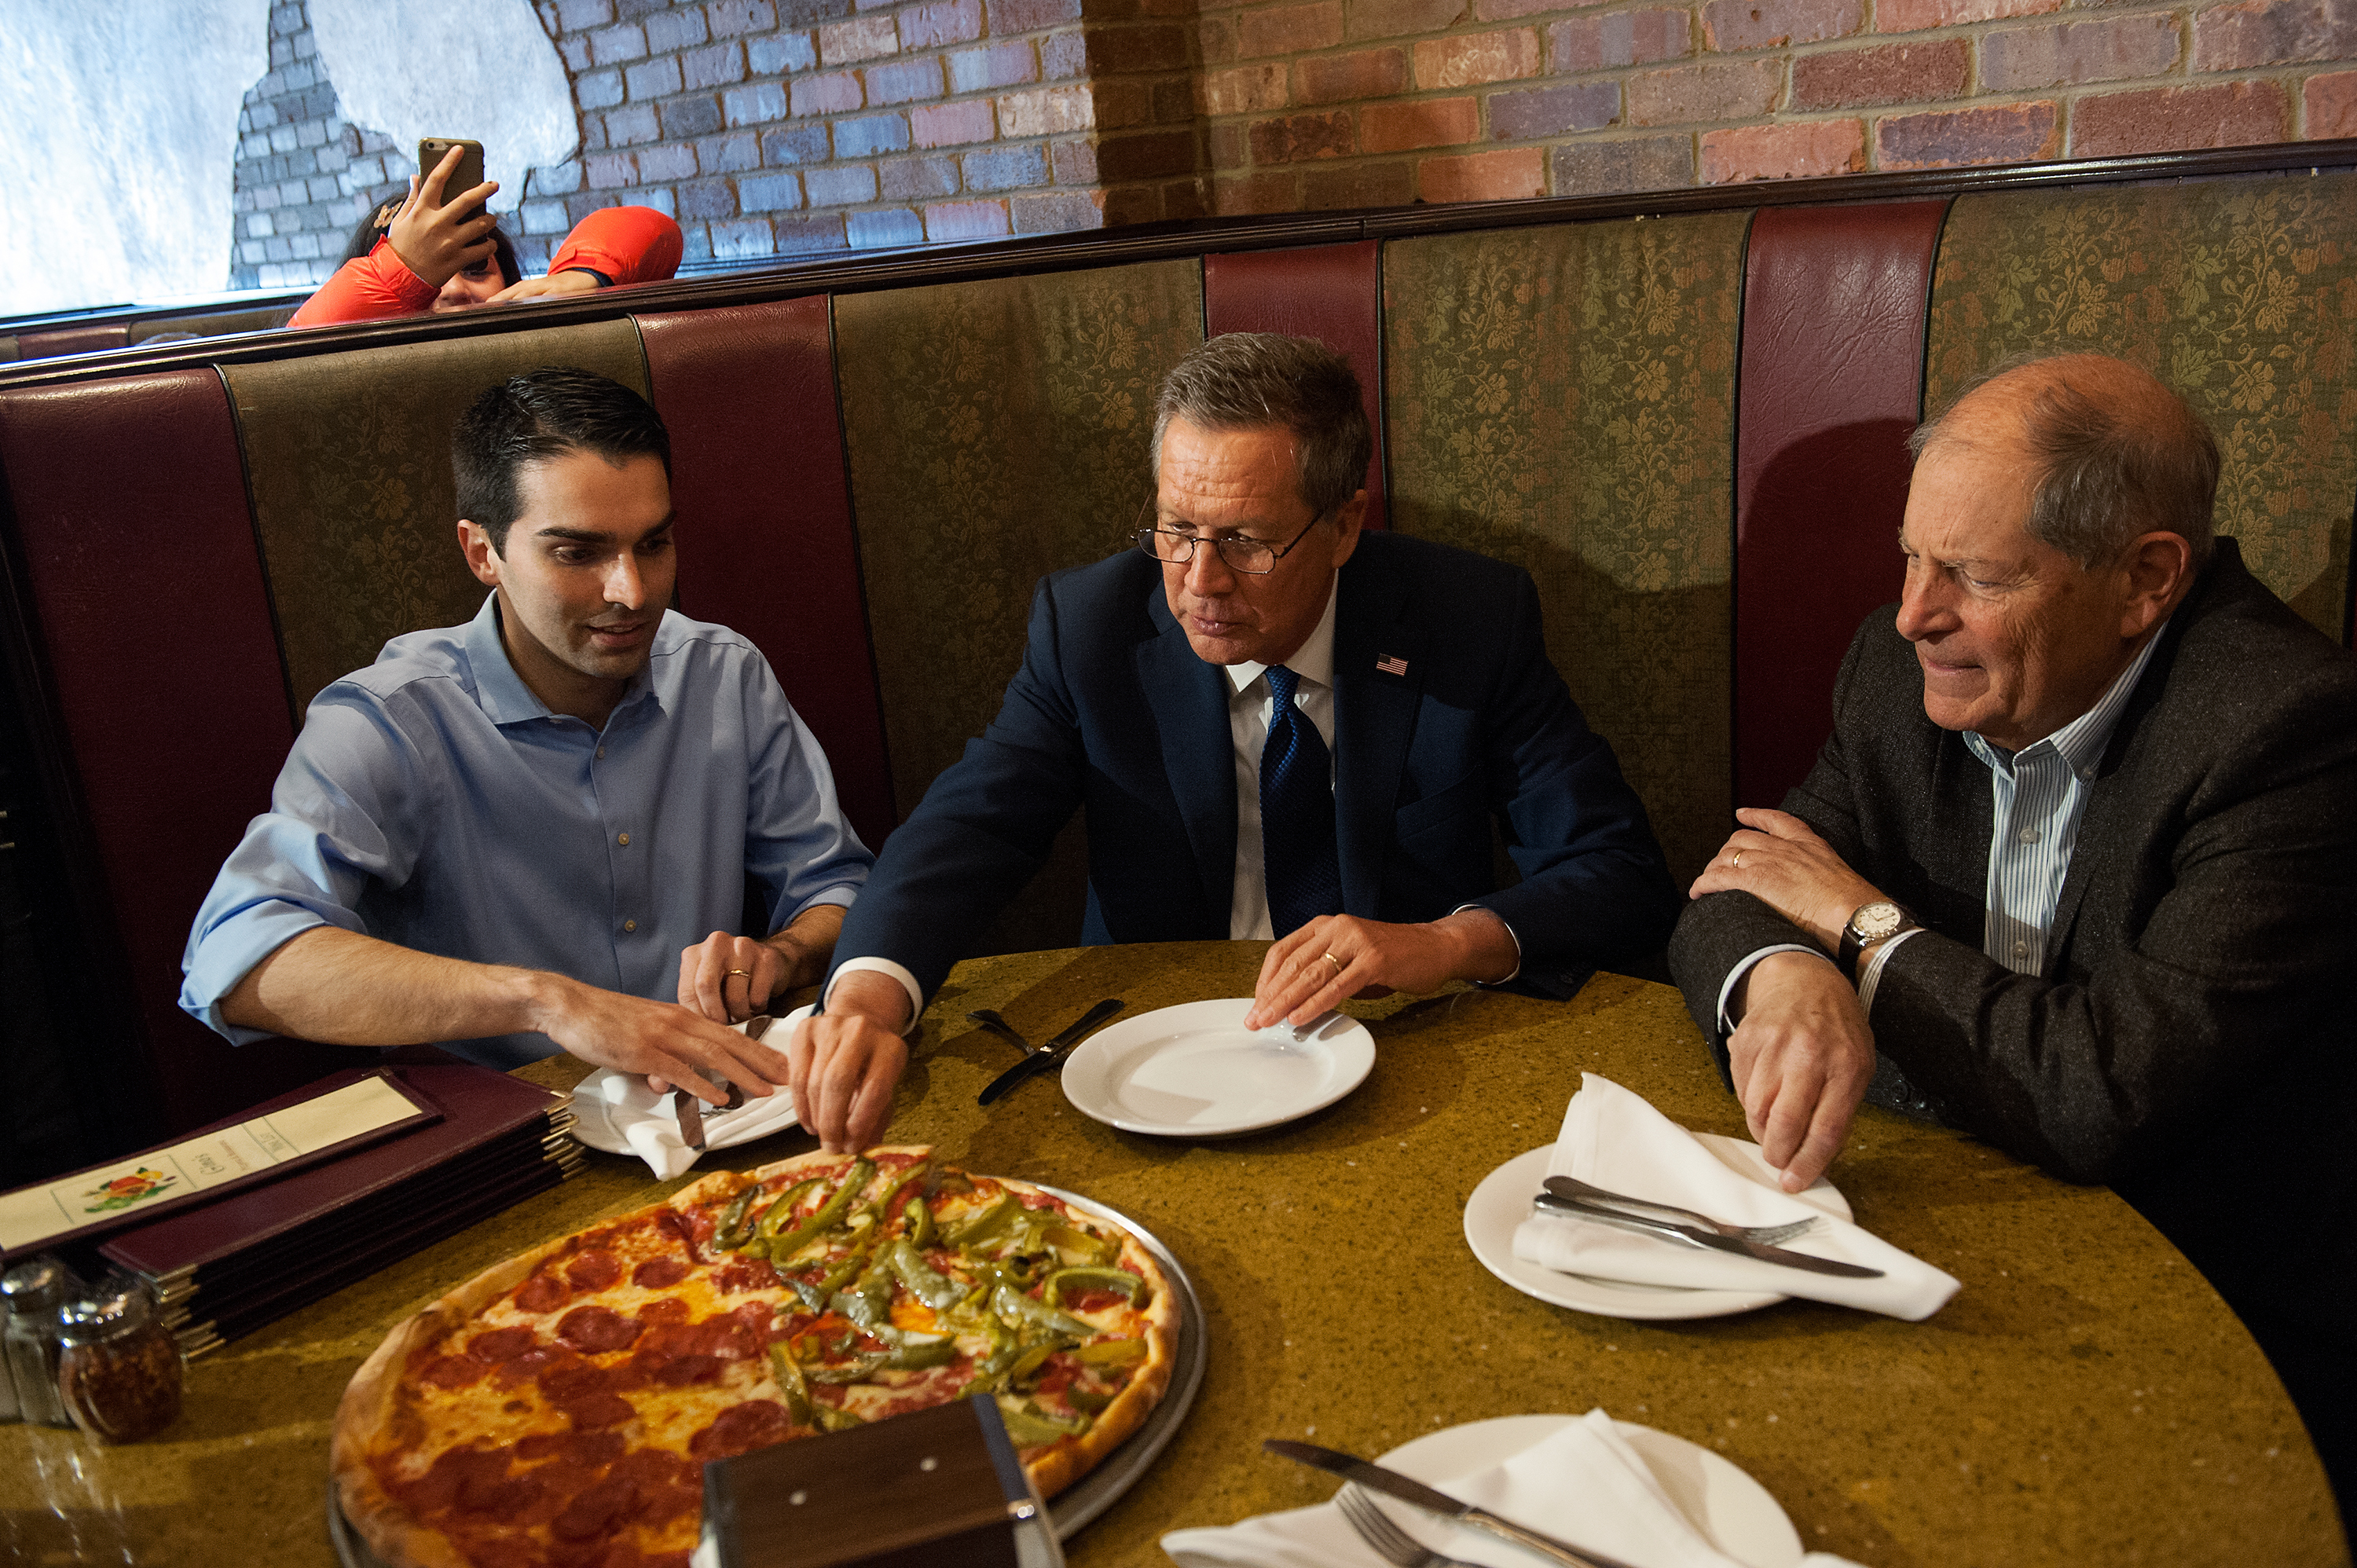 John Kasich and Bob Turner eat at Gino's Pizzeria and Restaurant in Queens, New York City on March 30, 2016. (Bryan Thomas—Getty Images)